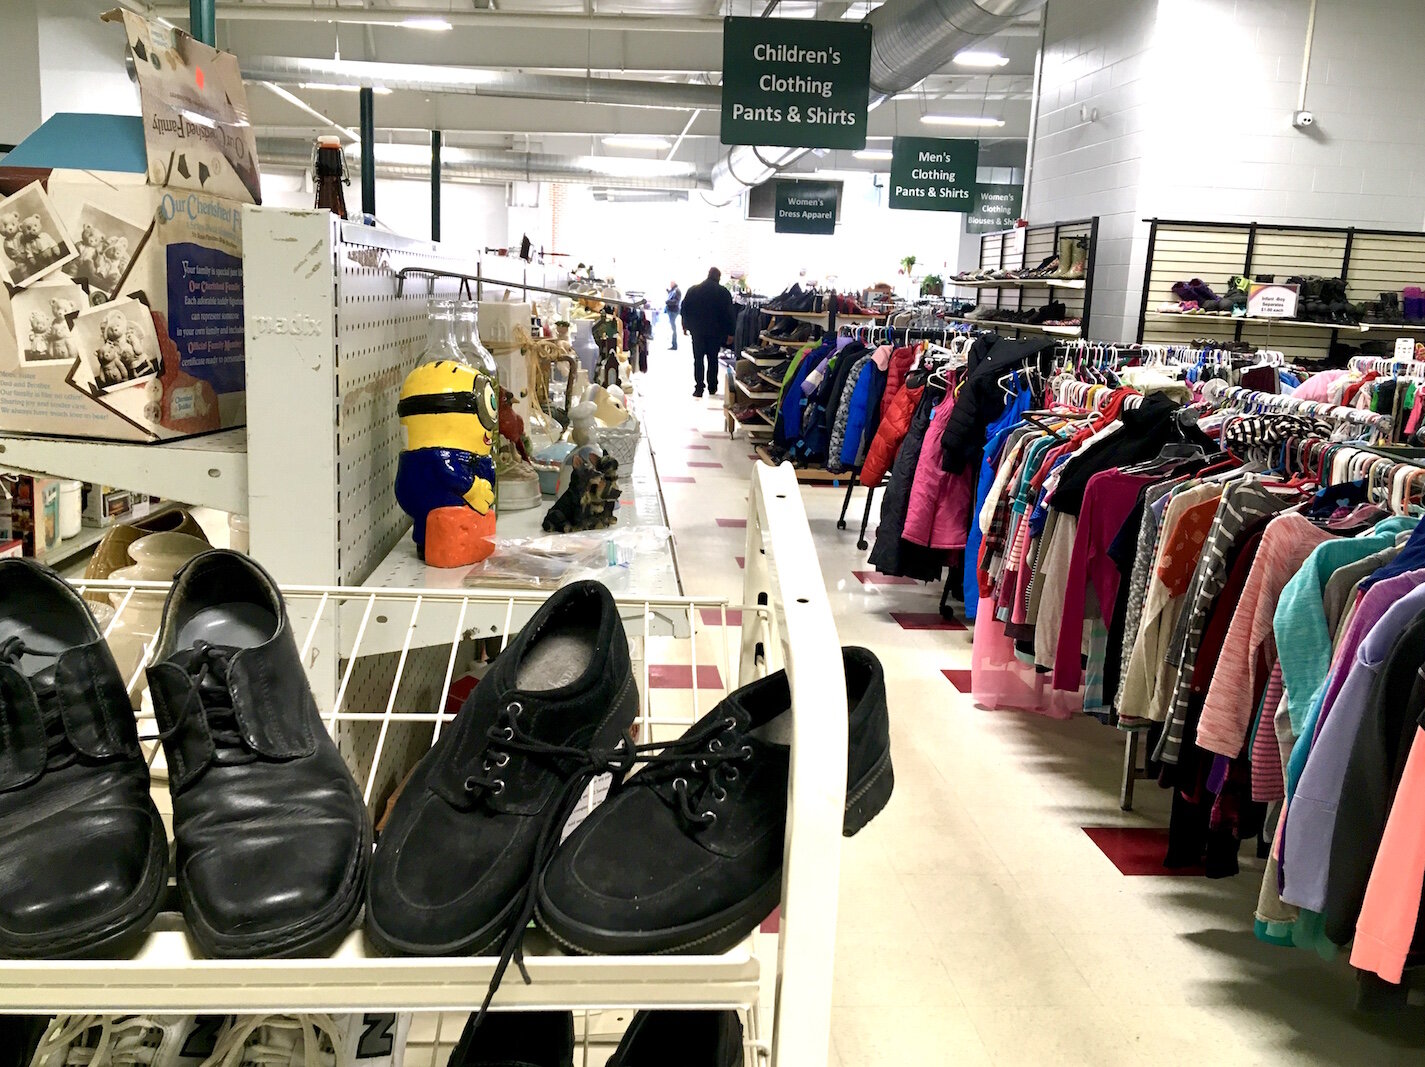  The Gospel Mission has a thrift and consignment shop at 524 N. Burdick St., just north of the mission’s main location. It is called Rescued Treasures.